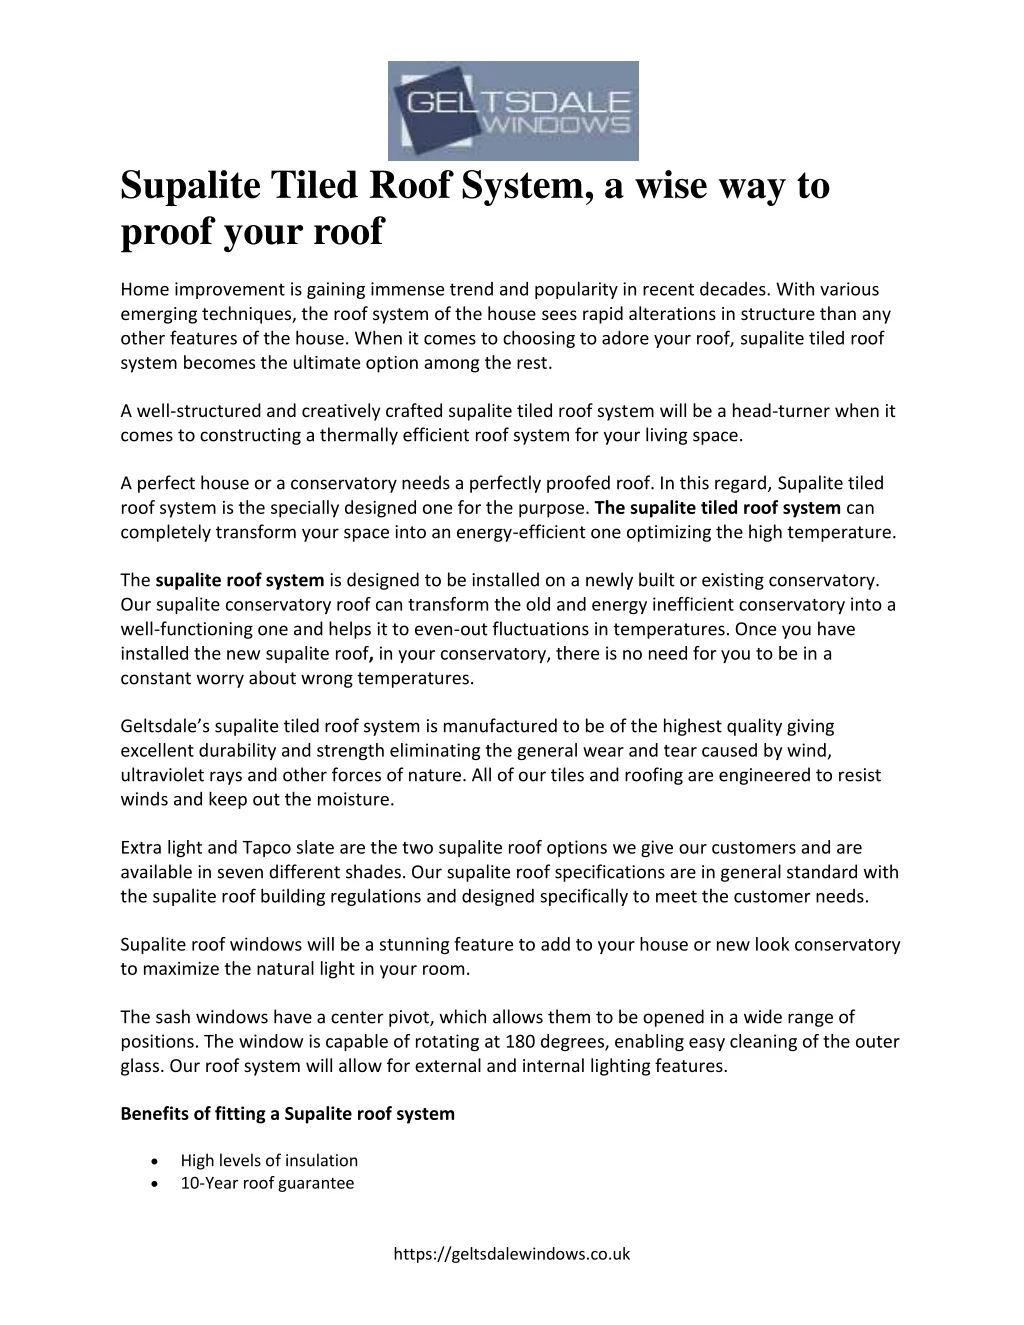 supalite tiled roof system a wise way to proof